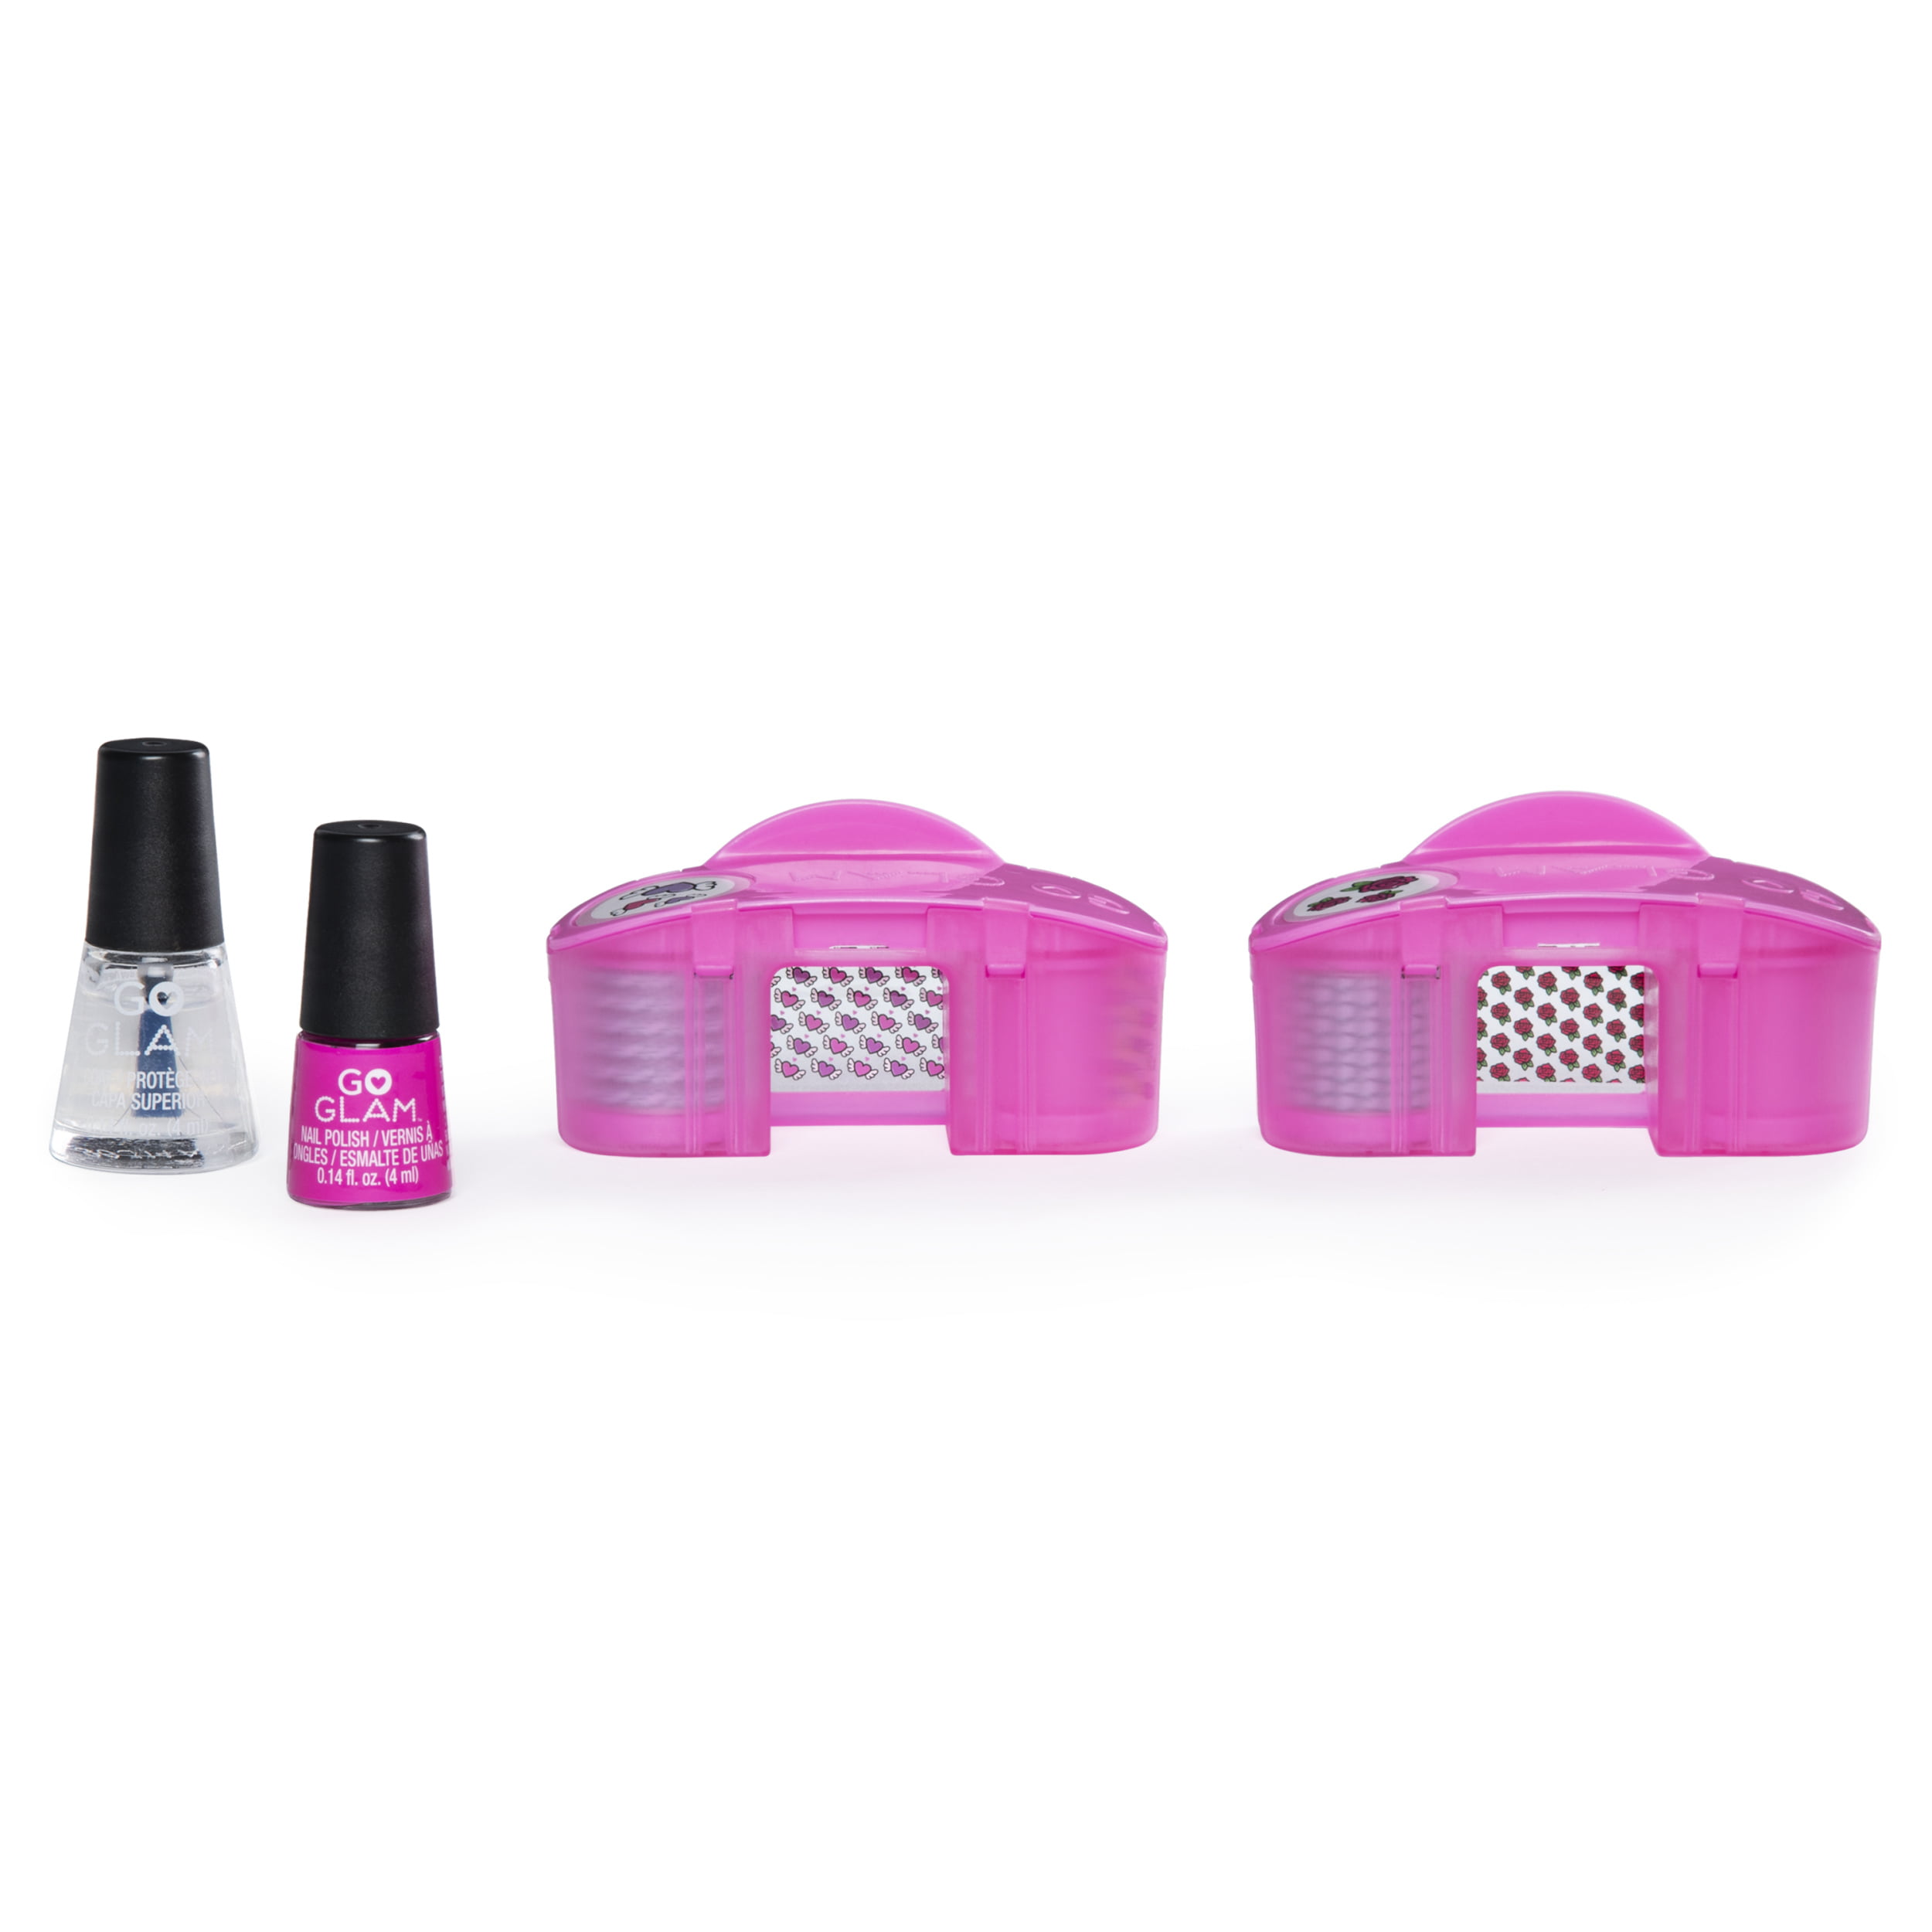 Go Glam Nail Stamper Beauty Set - Buy Educational Toys Online - Odeez Toy  Store